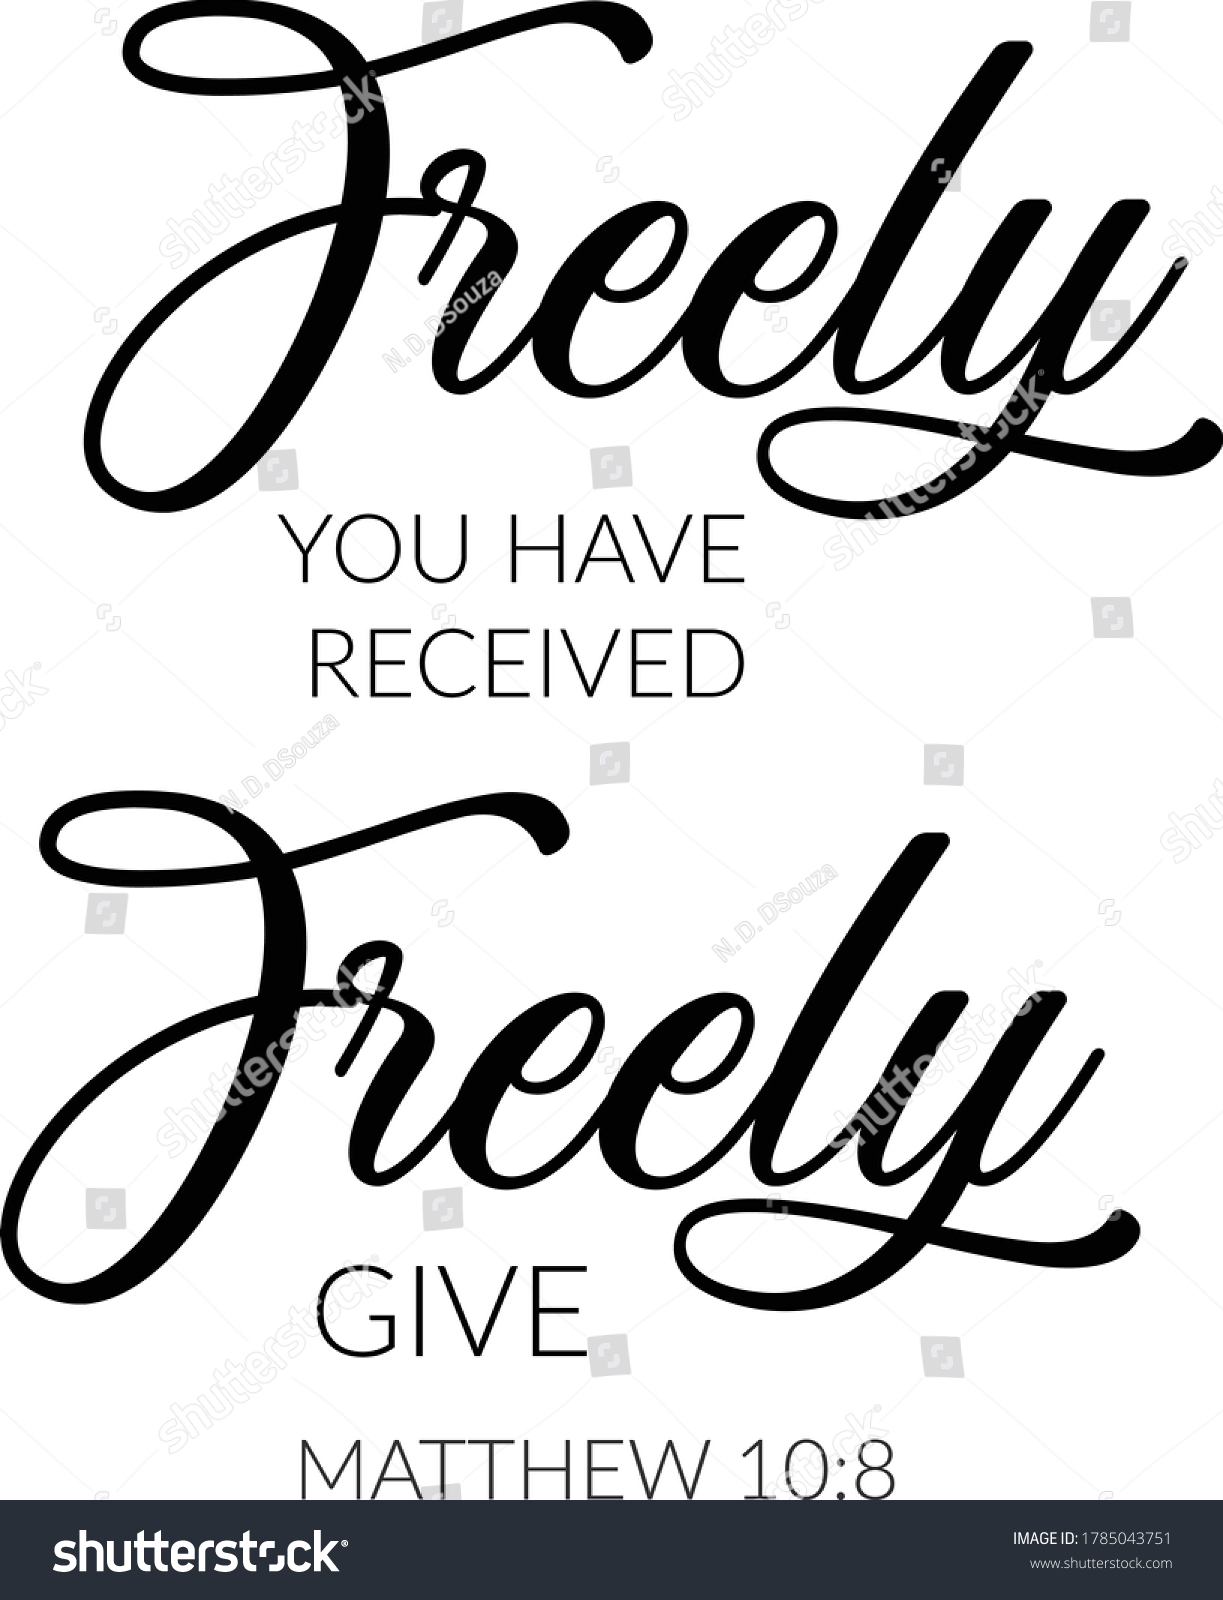 Freely You Have Received Freely Give Stock Vector Royalty Free